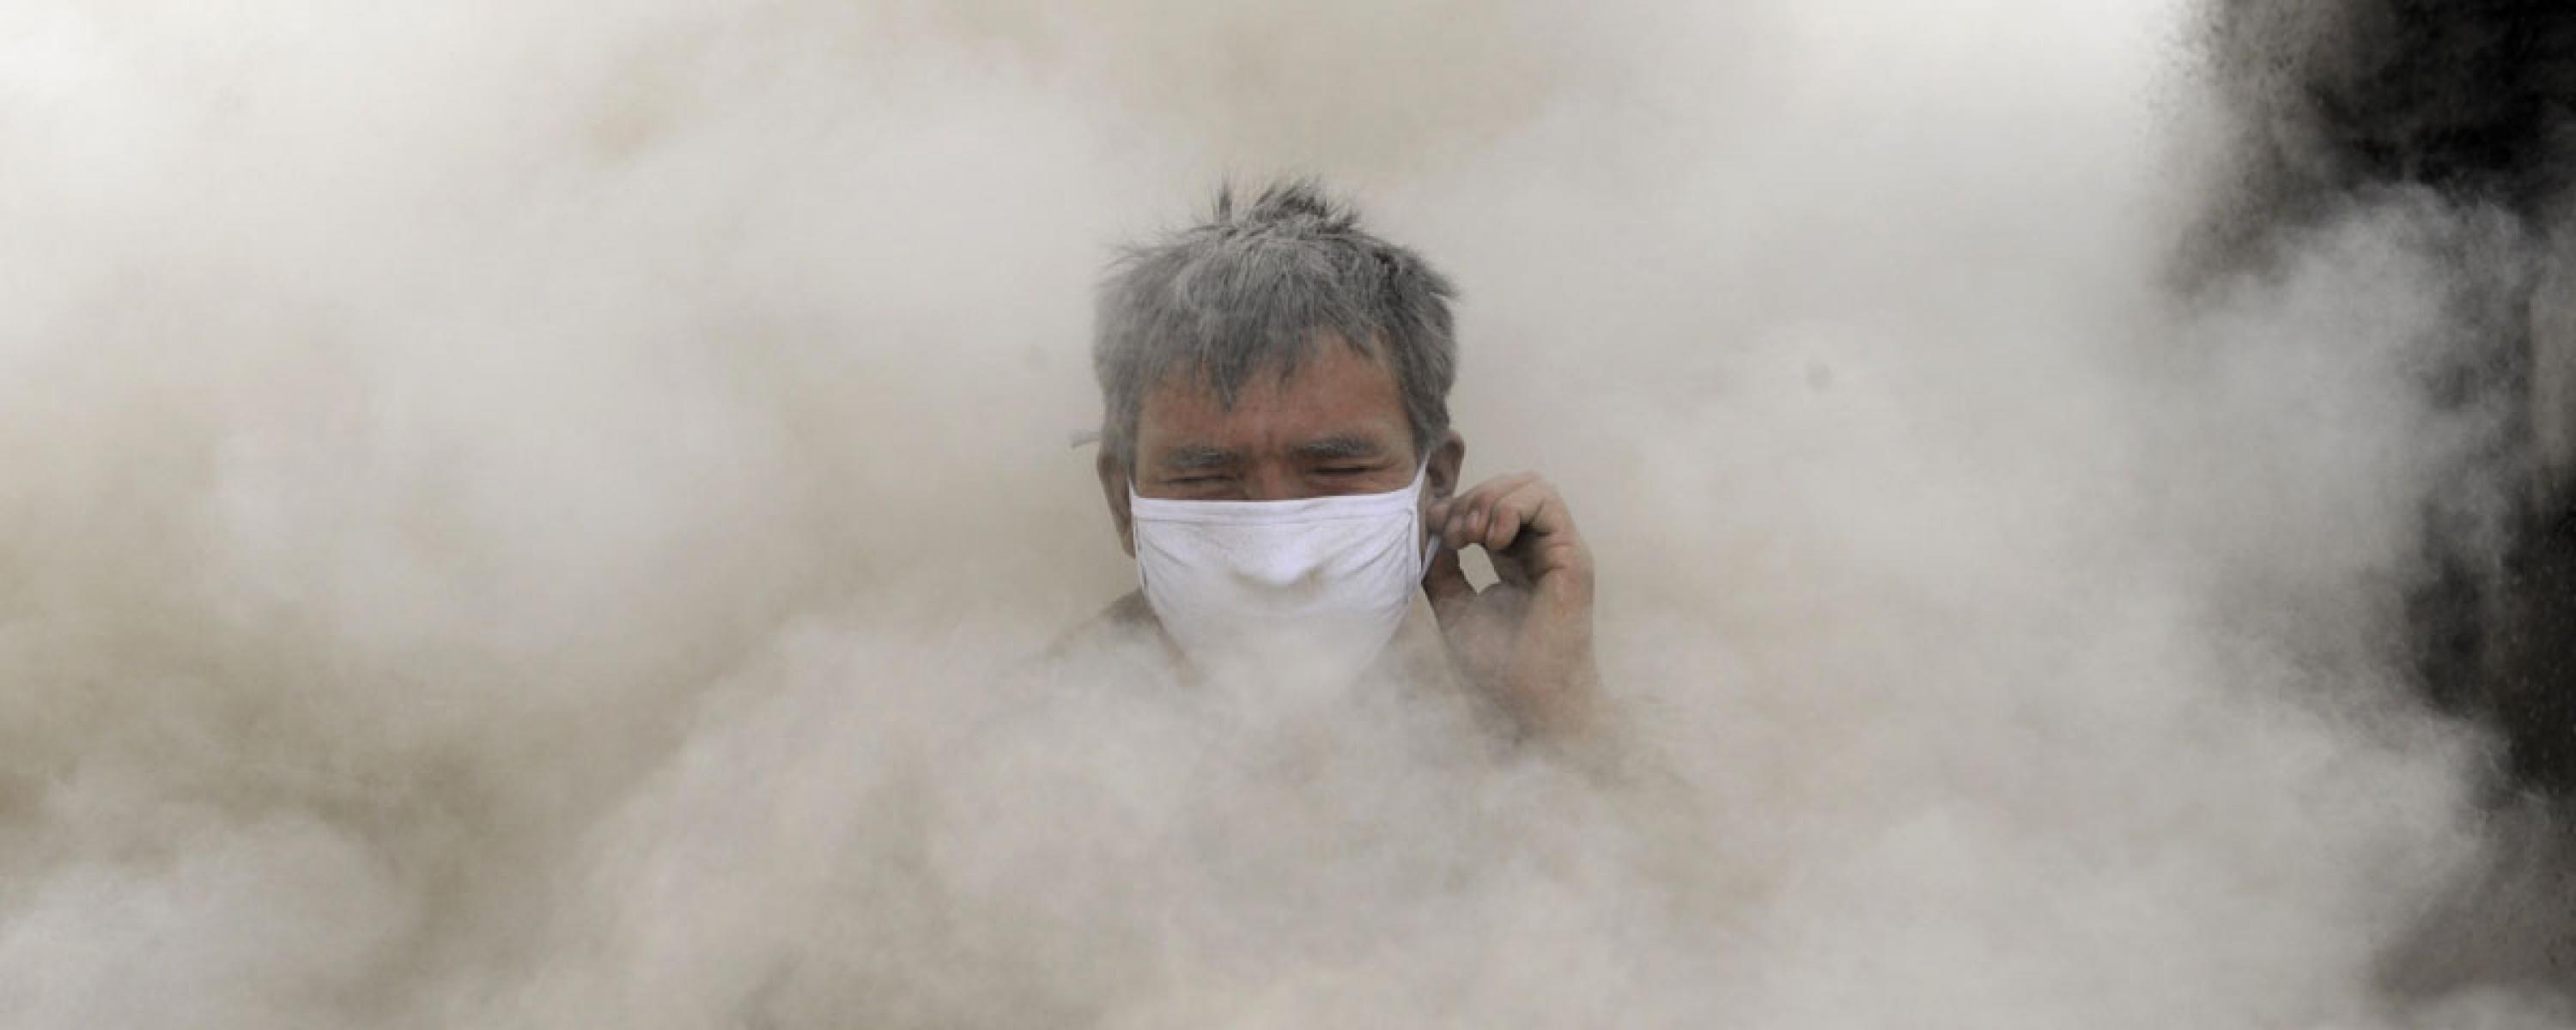 What can employers do to reduce worker's exposure to dust?